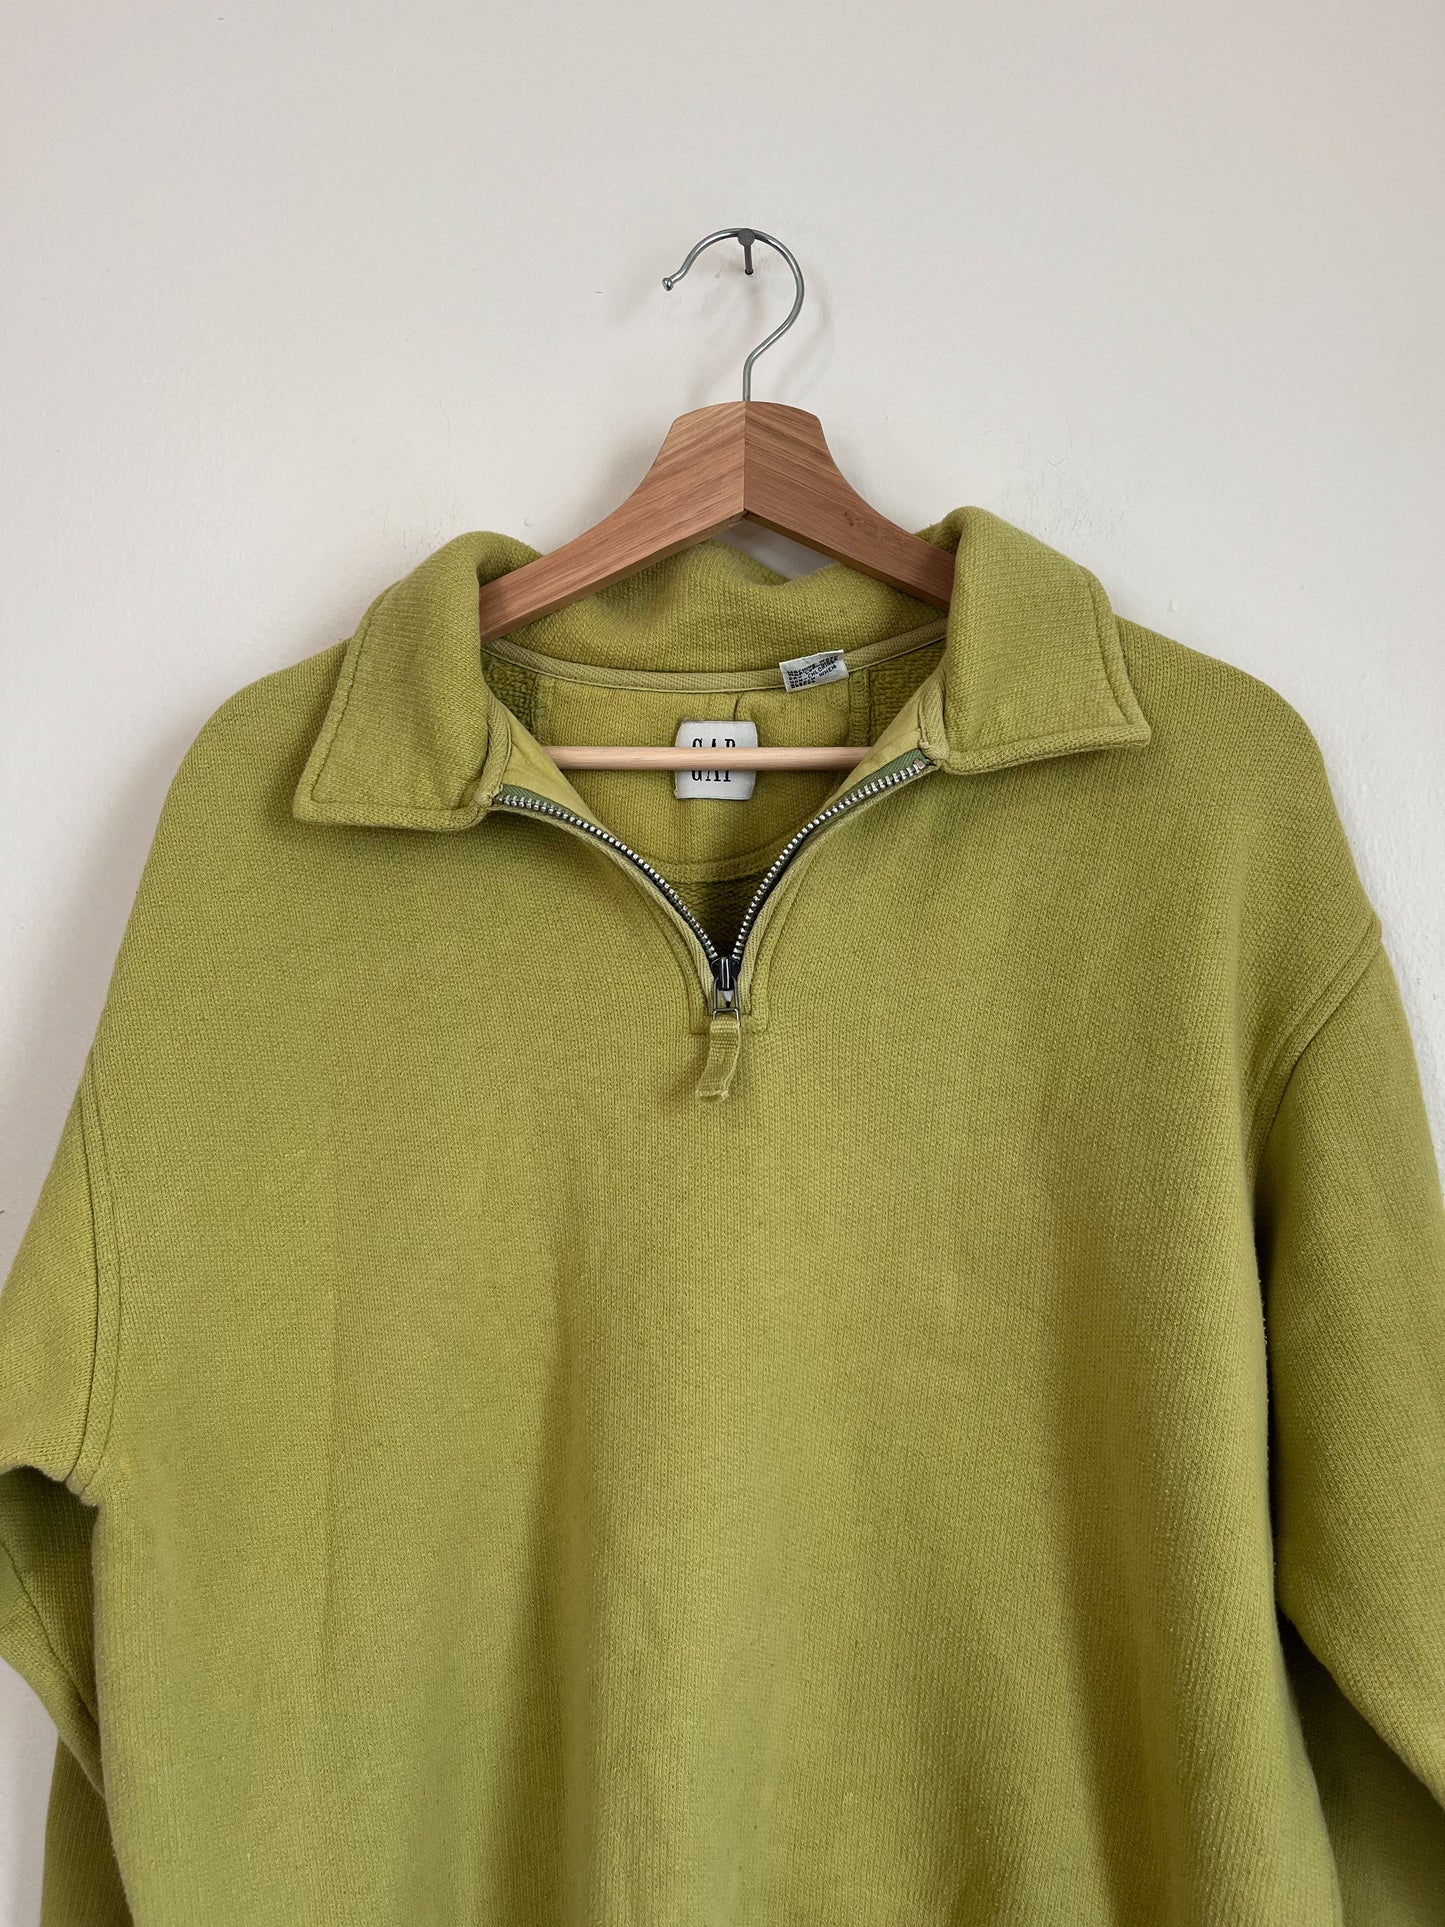 chartreuse pullover (small - med)